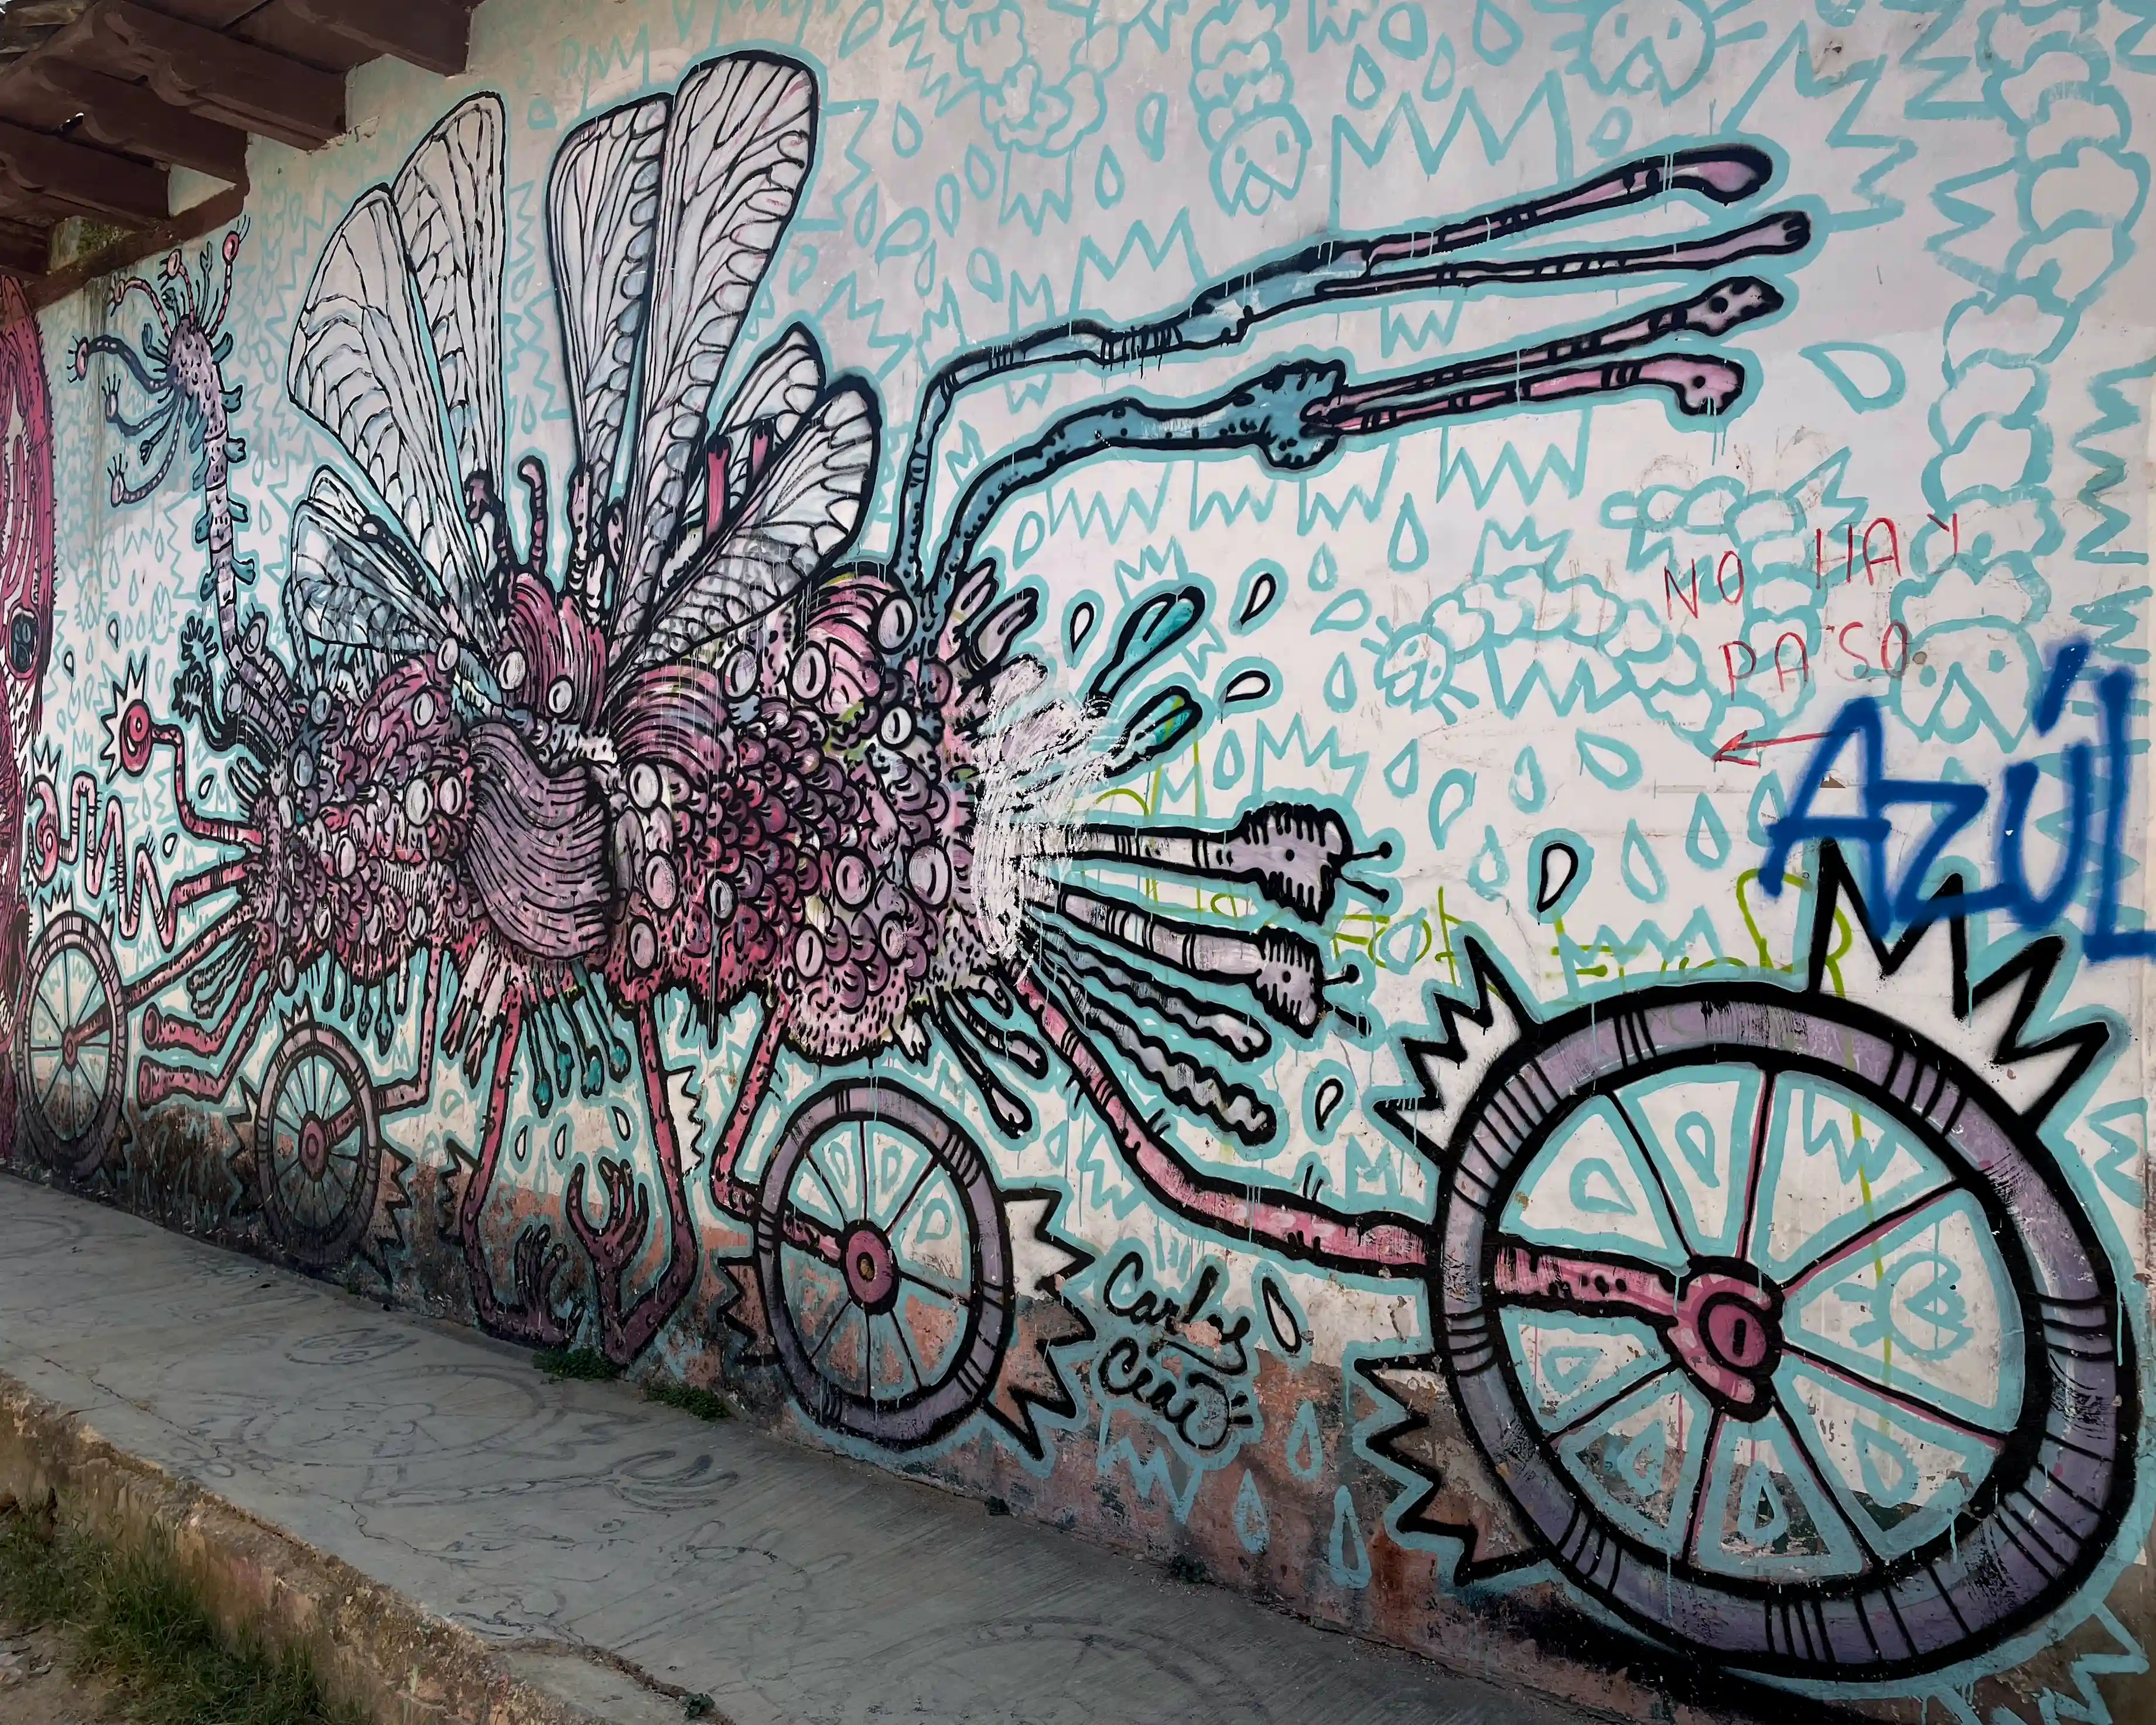 Graffit of a surreal insect bicycle on a wall in San Cristóbal de las Casas.